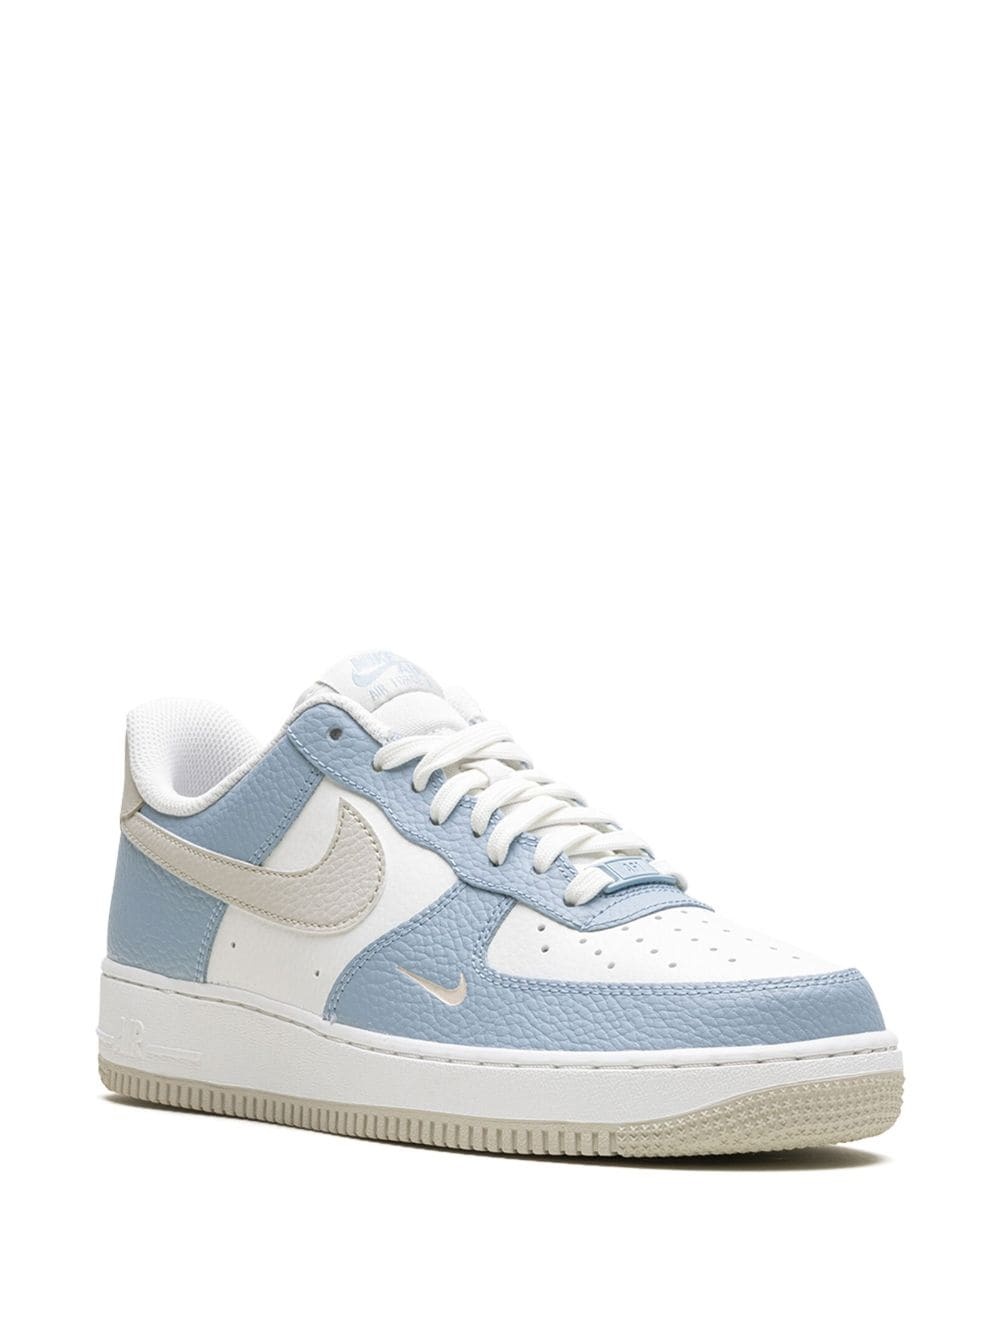 Air Force '07 "Baby Blue" sneakers - 2